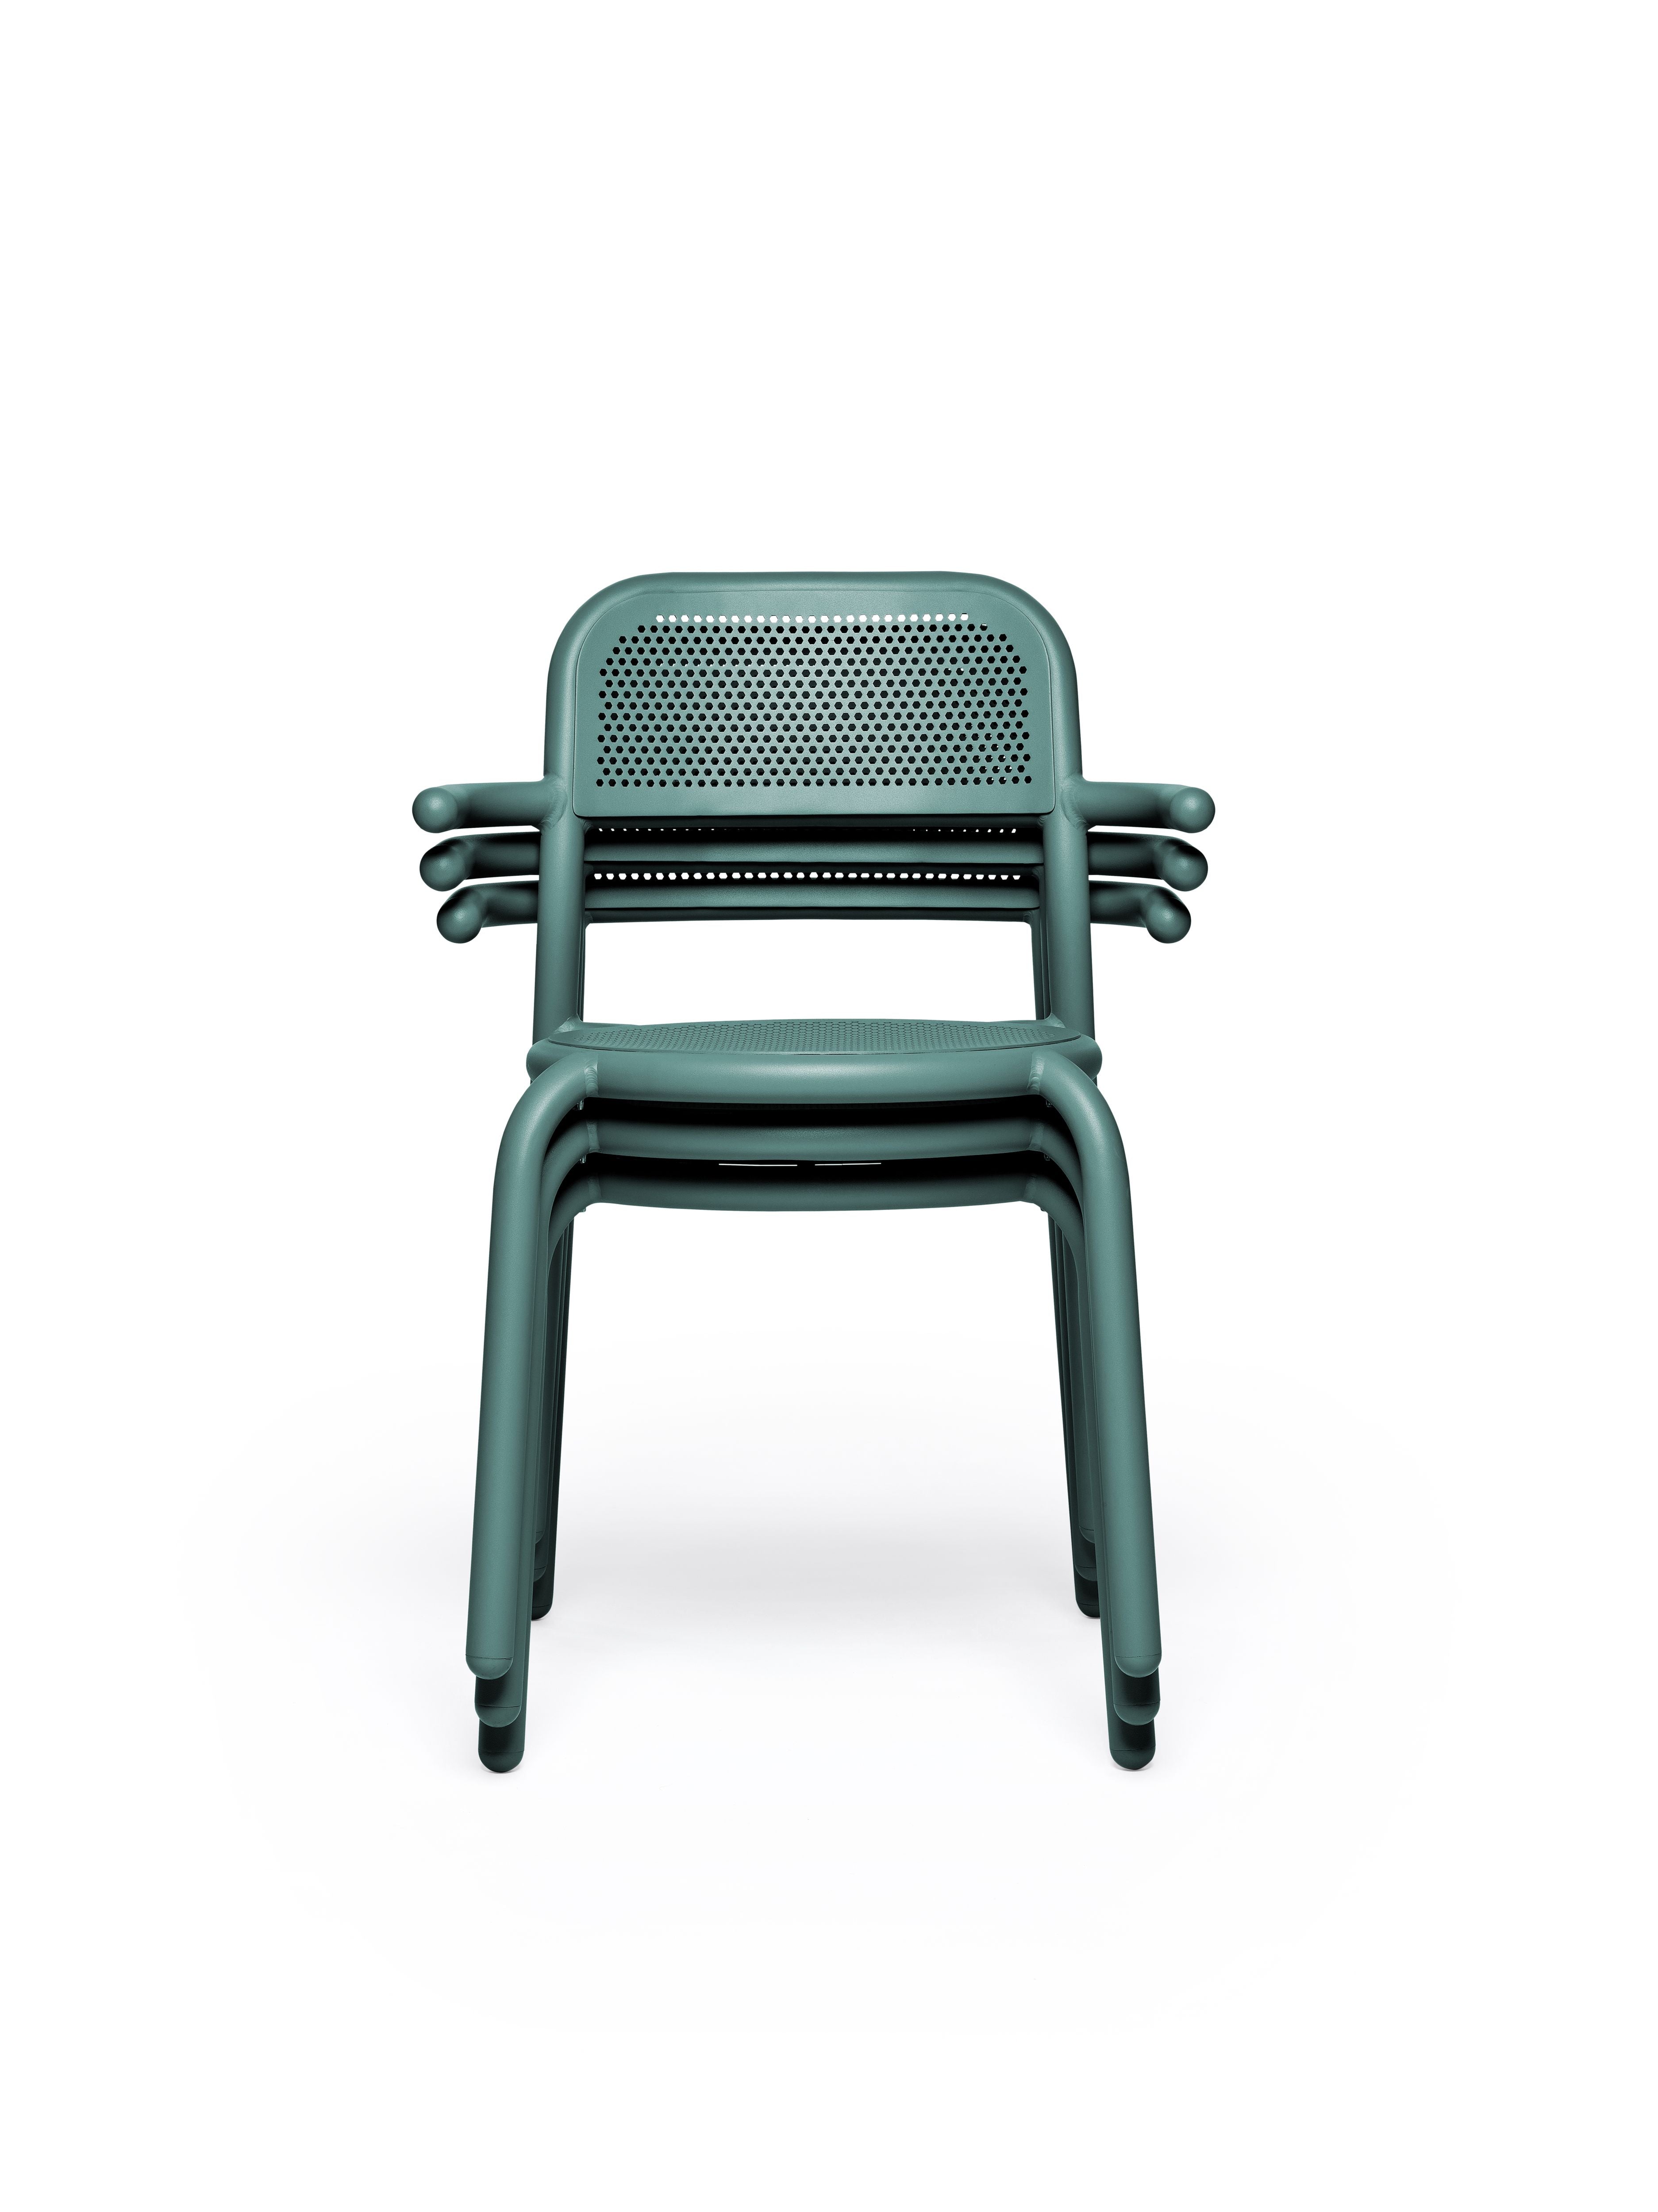 Fatboy Toni fauteuil Pine Green, 2 pc's.